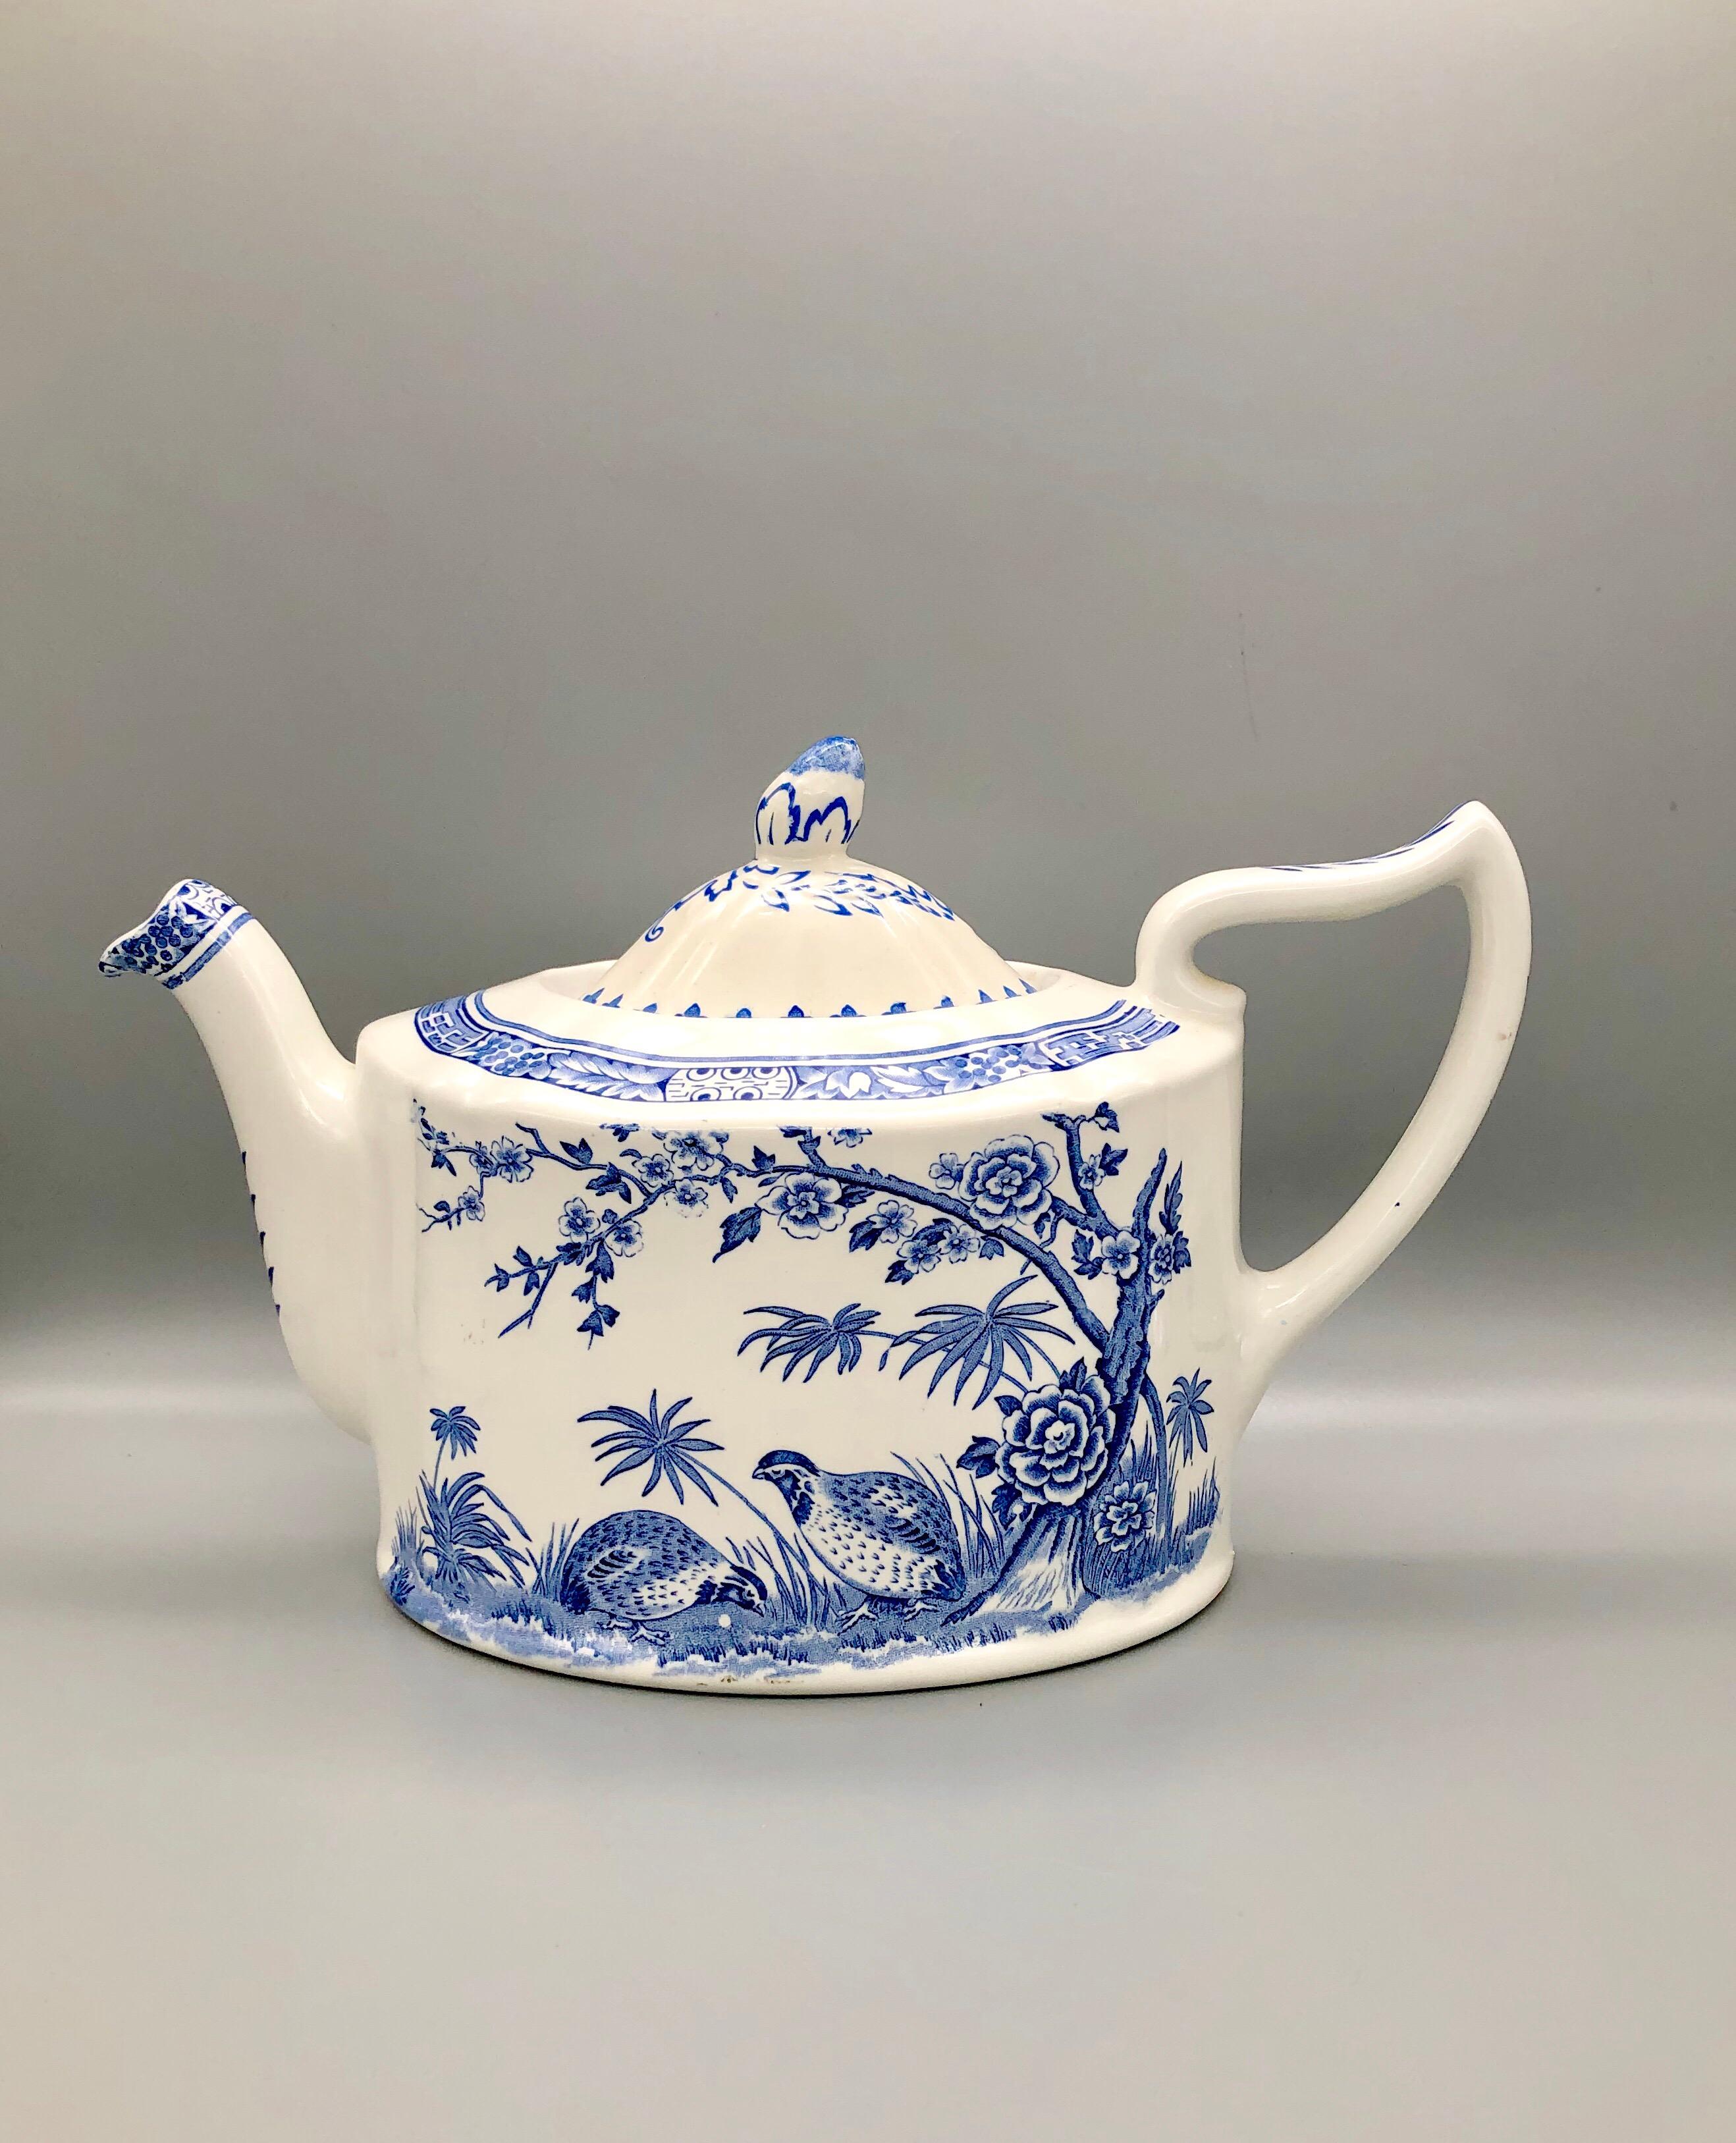 Furnivals quail pottery in blue and white remains one of the most popular patterns for collectors. This three-piece set includes the teapot, creamer, and sugar bowl with lid. Condition is quite good, with only minor crazing and minimal